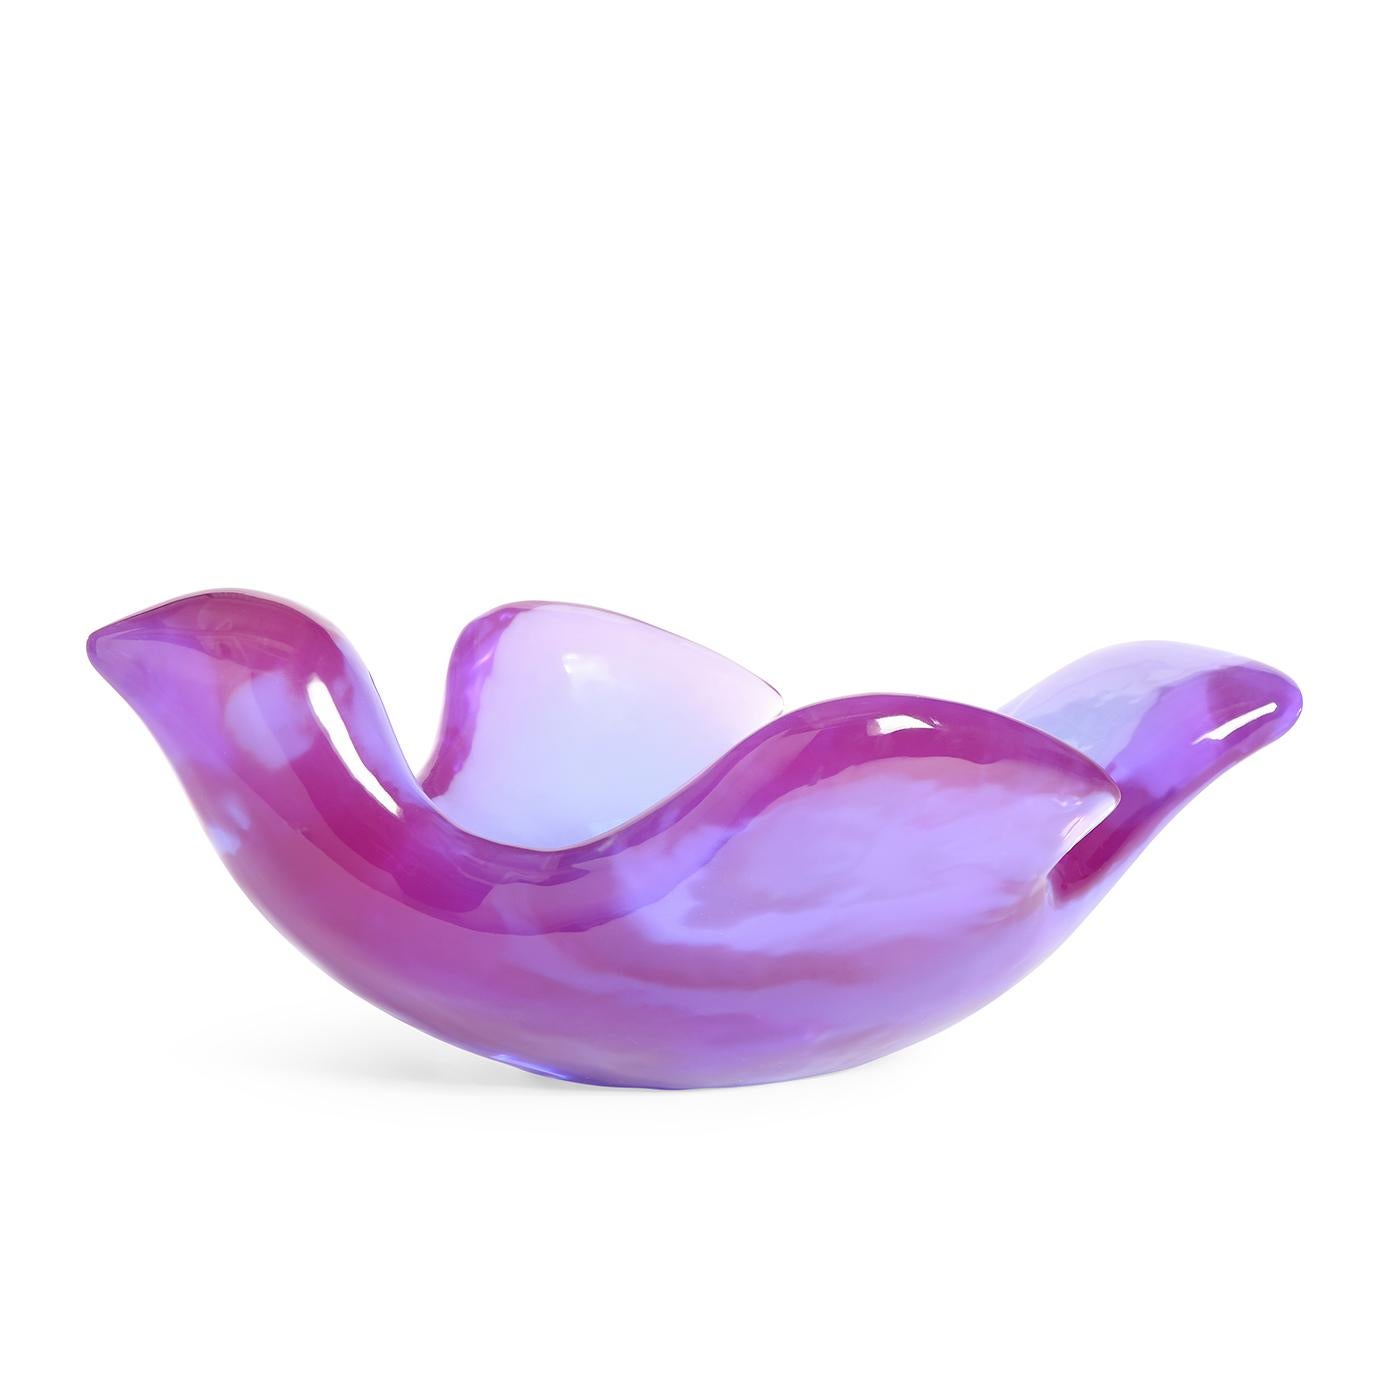 Surreal size. A mesmerizing must-have in solid purple acrylic, our giant bird bowl looks fab anchoring a tablescape or makes a captivating catchall on an entryway console.

Our oversized acrylic sculptures start their journey in our Soho pottery